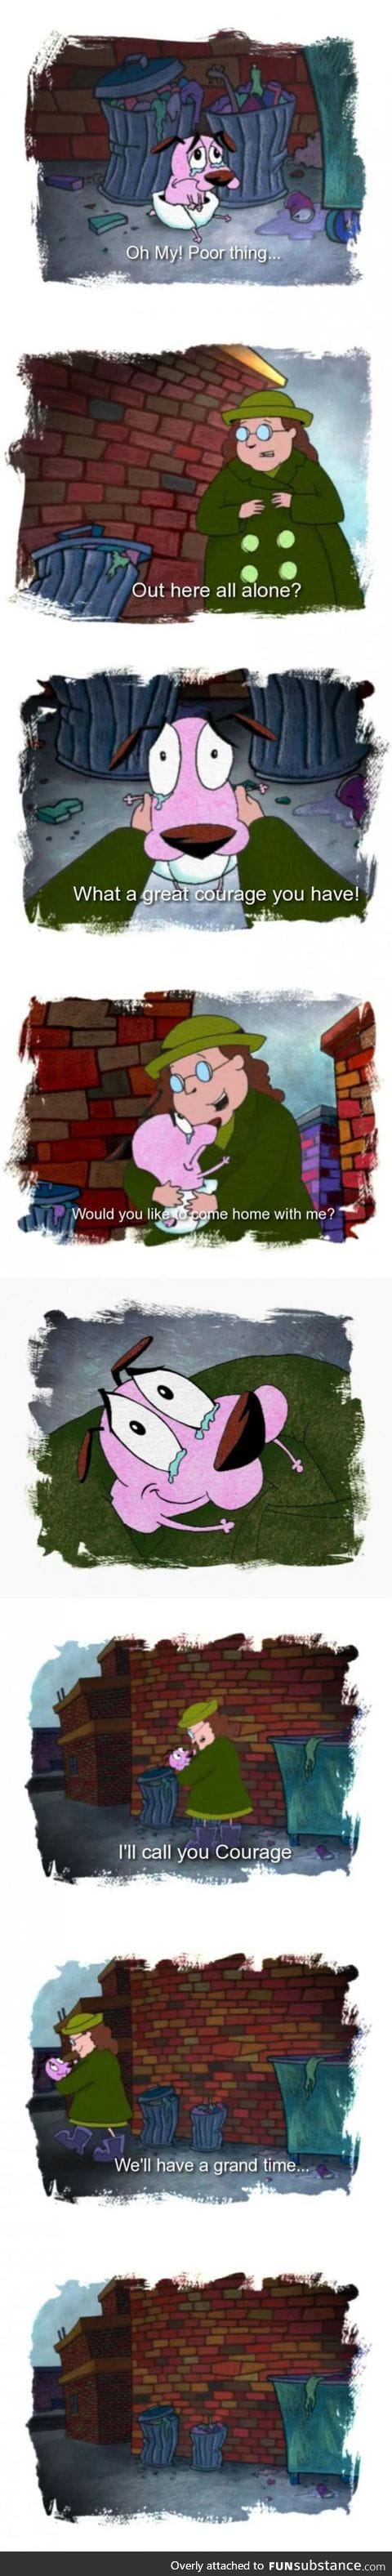 Courage the cowardly dog origins